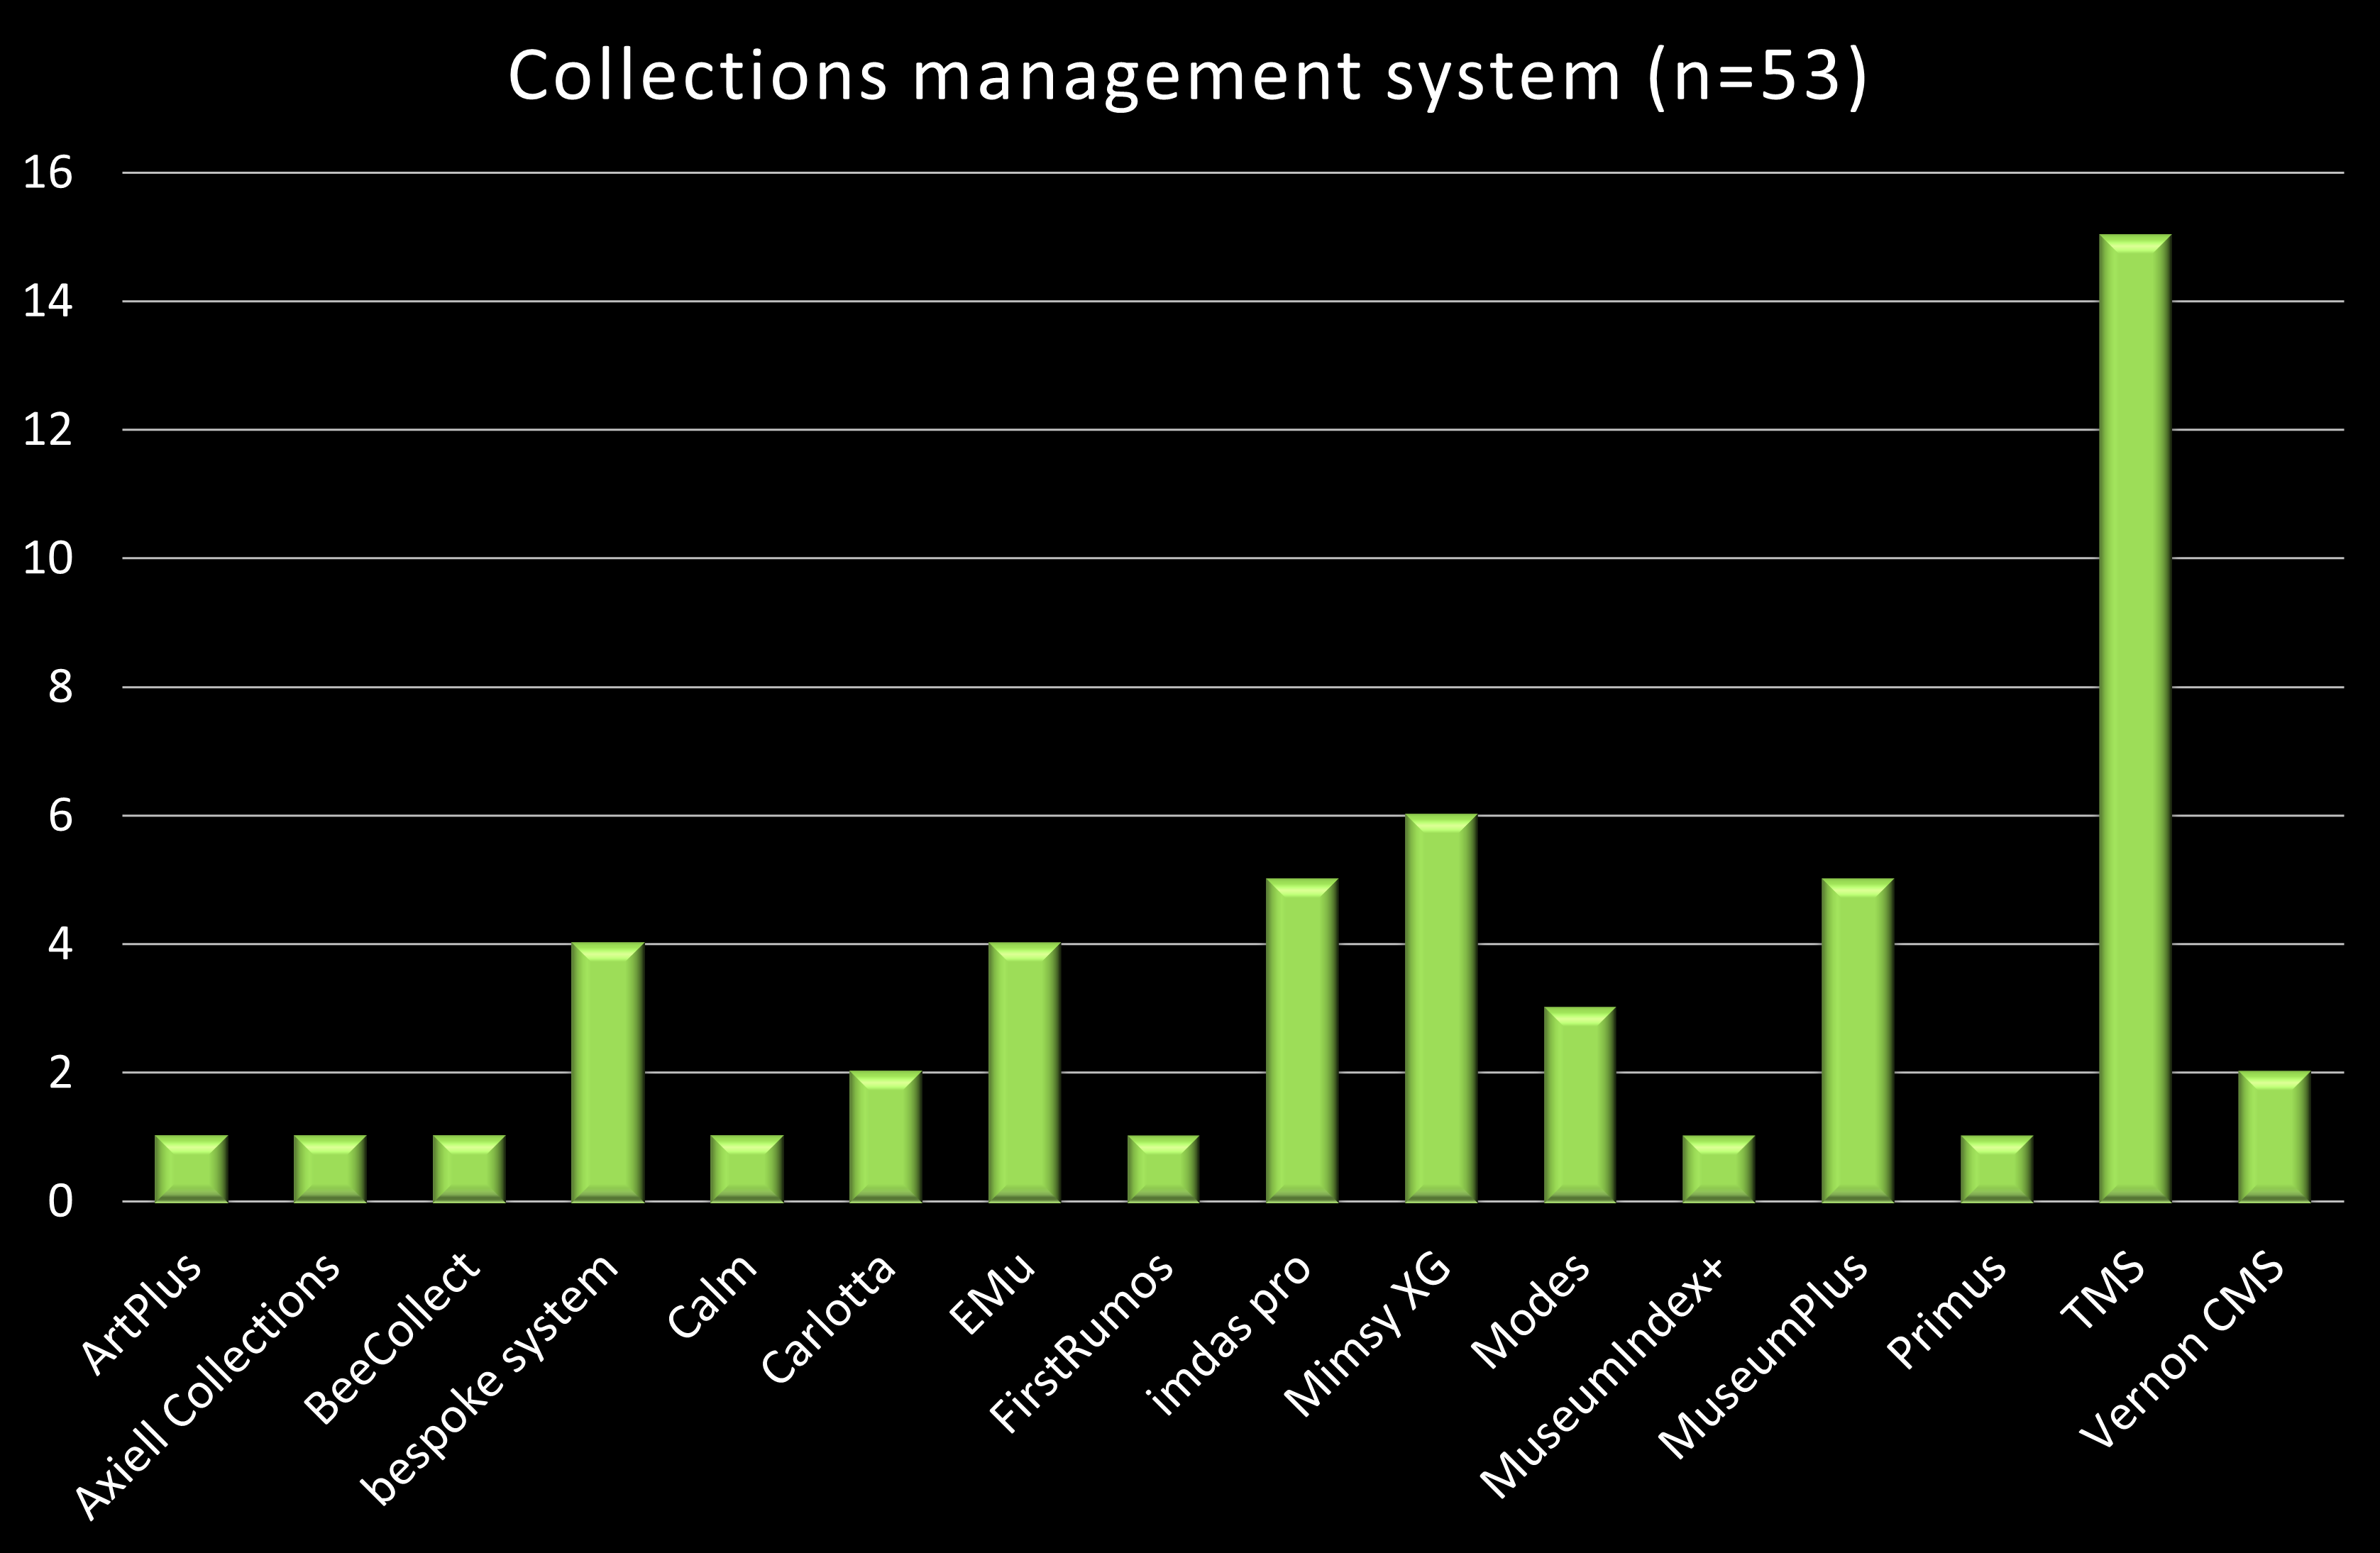 Chart showing the collections management systems used by museums which have responded to the survey